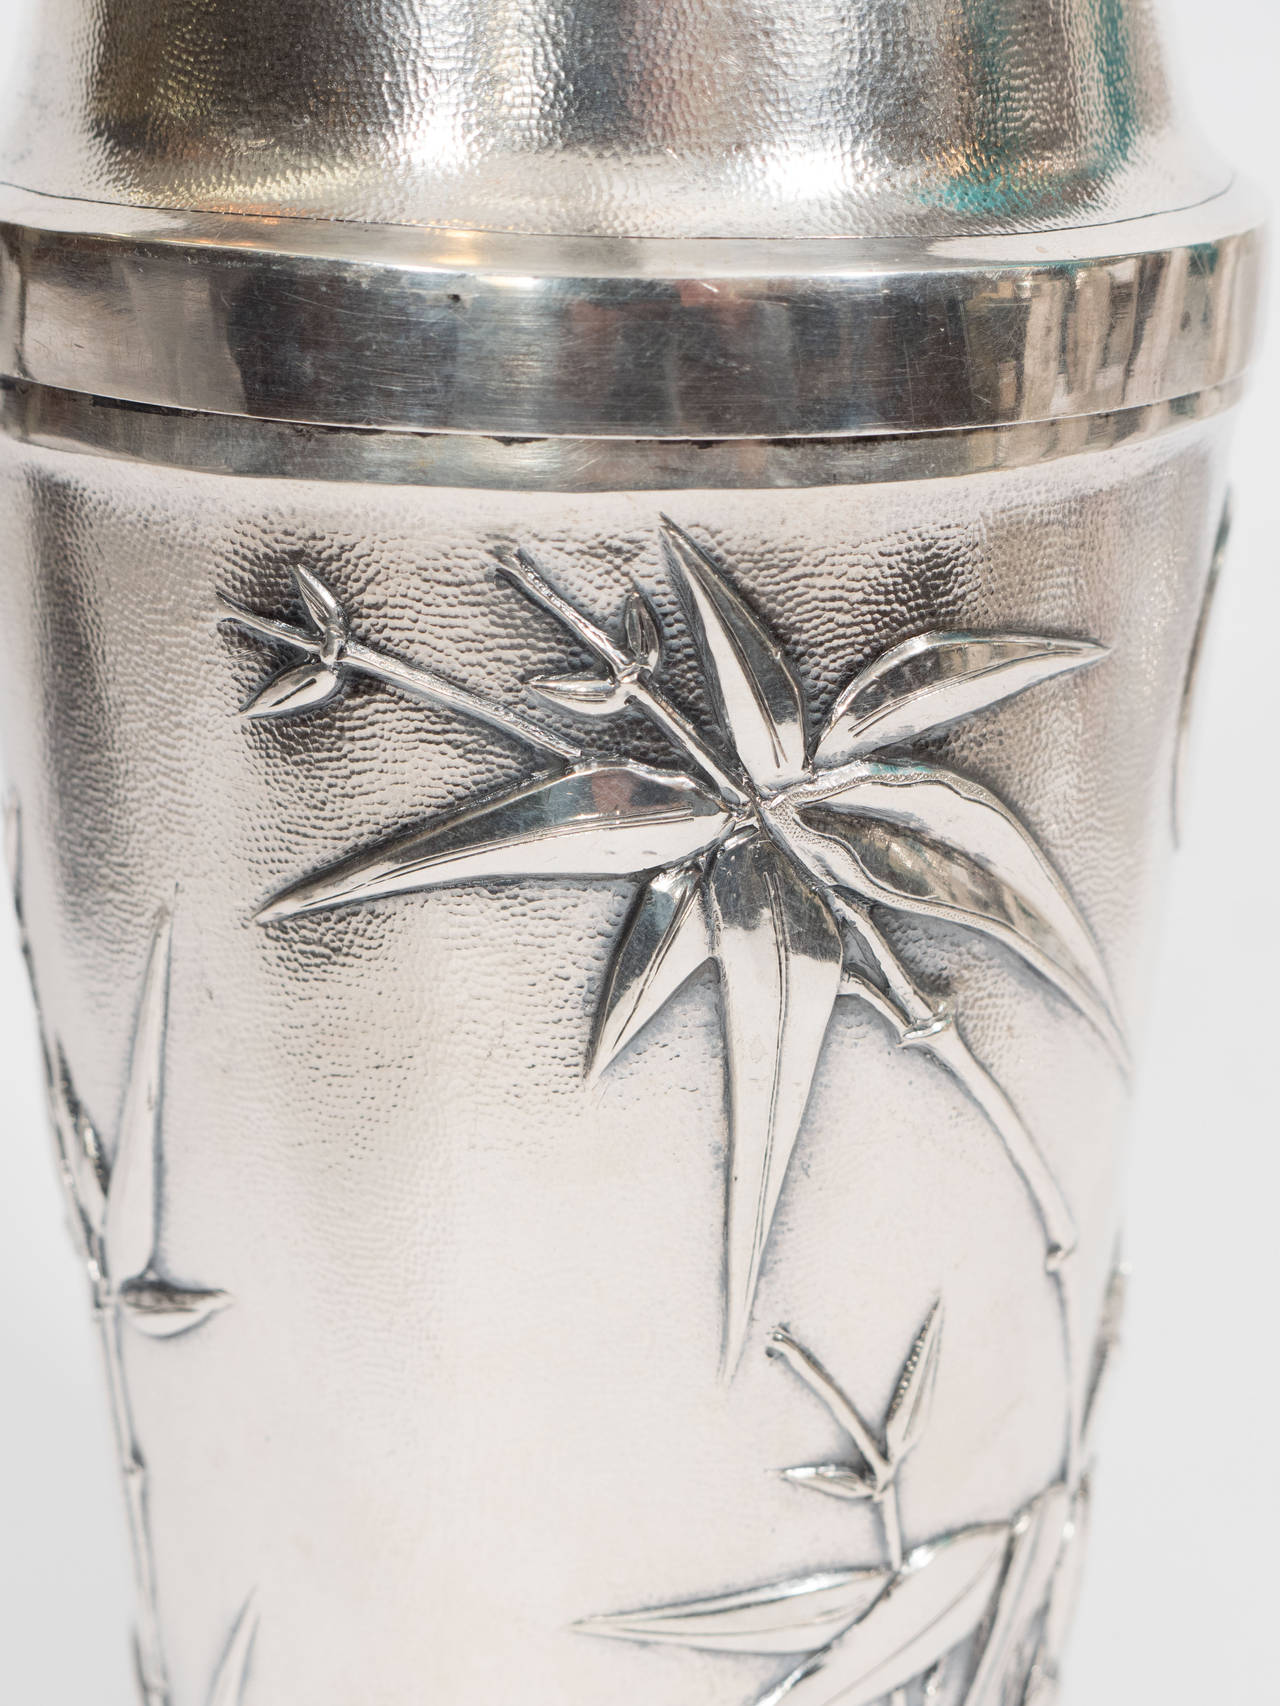 20th Century Chinese Export 800 Silver Cocktail Shaker by Zee Sung, circa 1920s